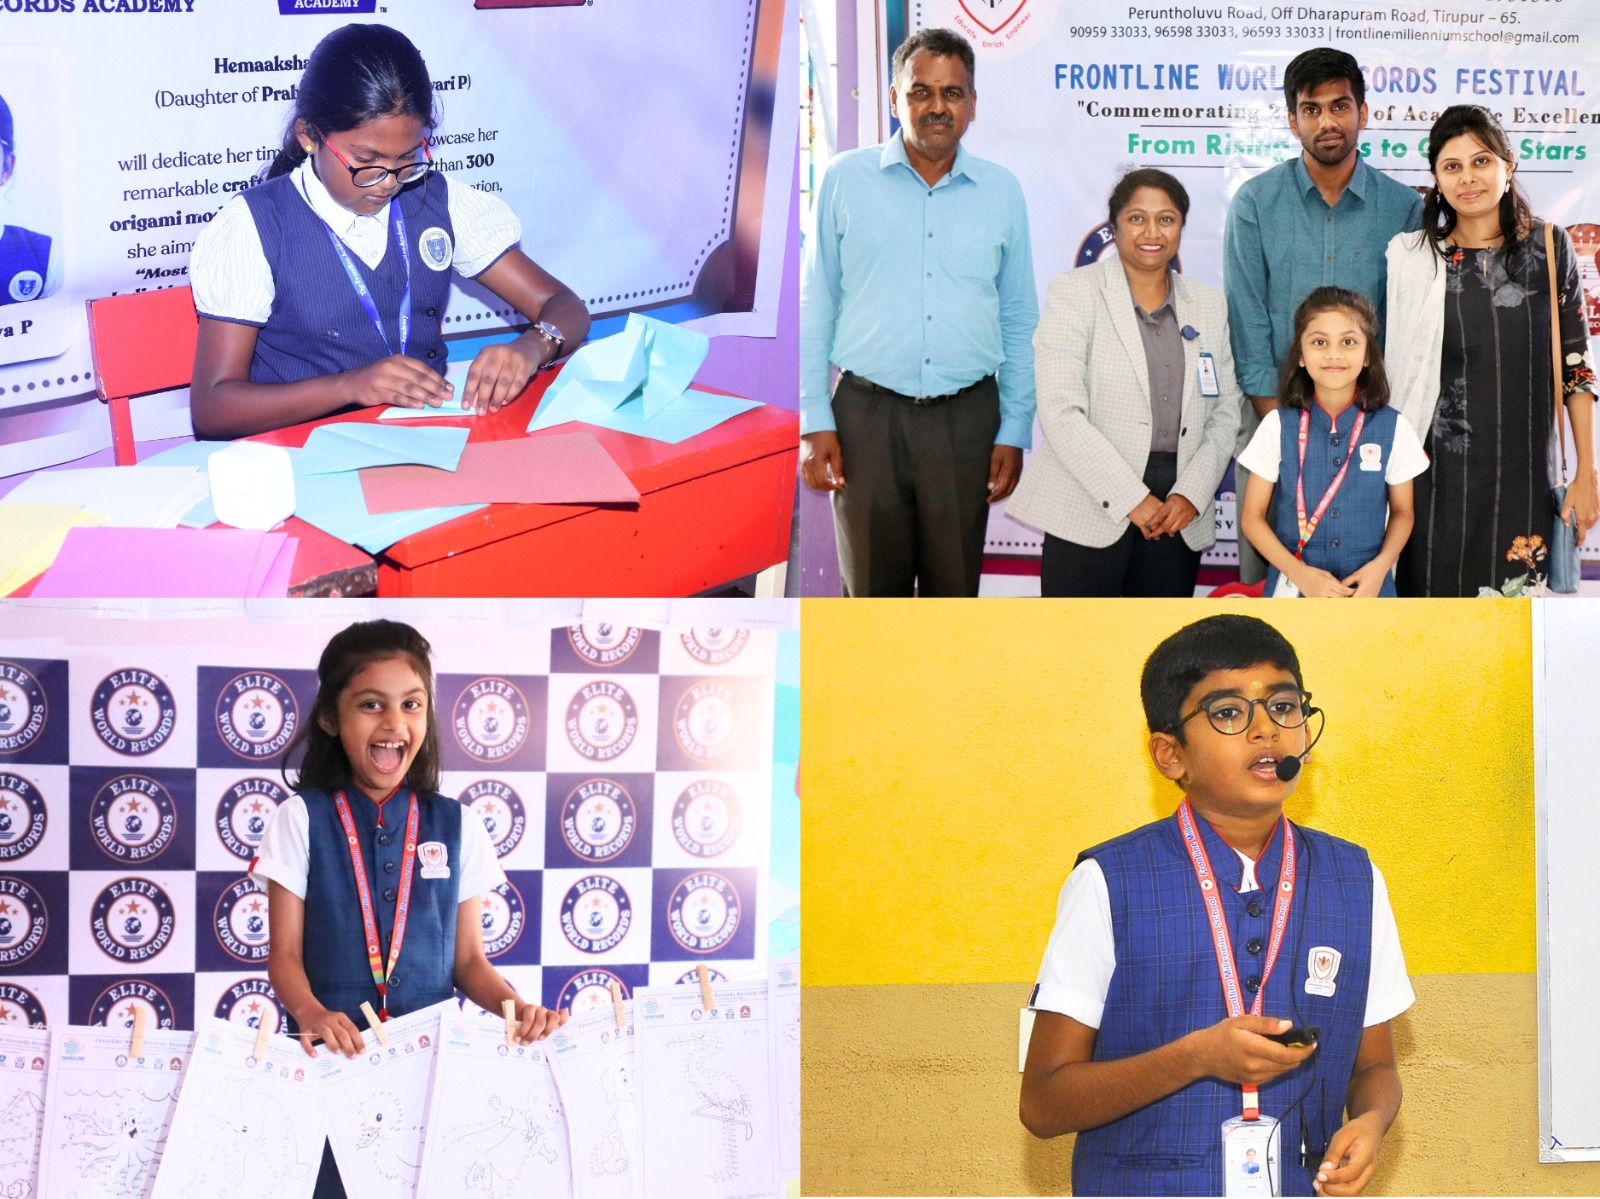 Frontline Schools' World Records Festival: Unveiling Extraordinary Achievements in Dance, Cooking, Literature, Art, and More!